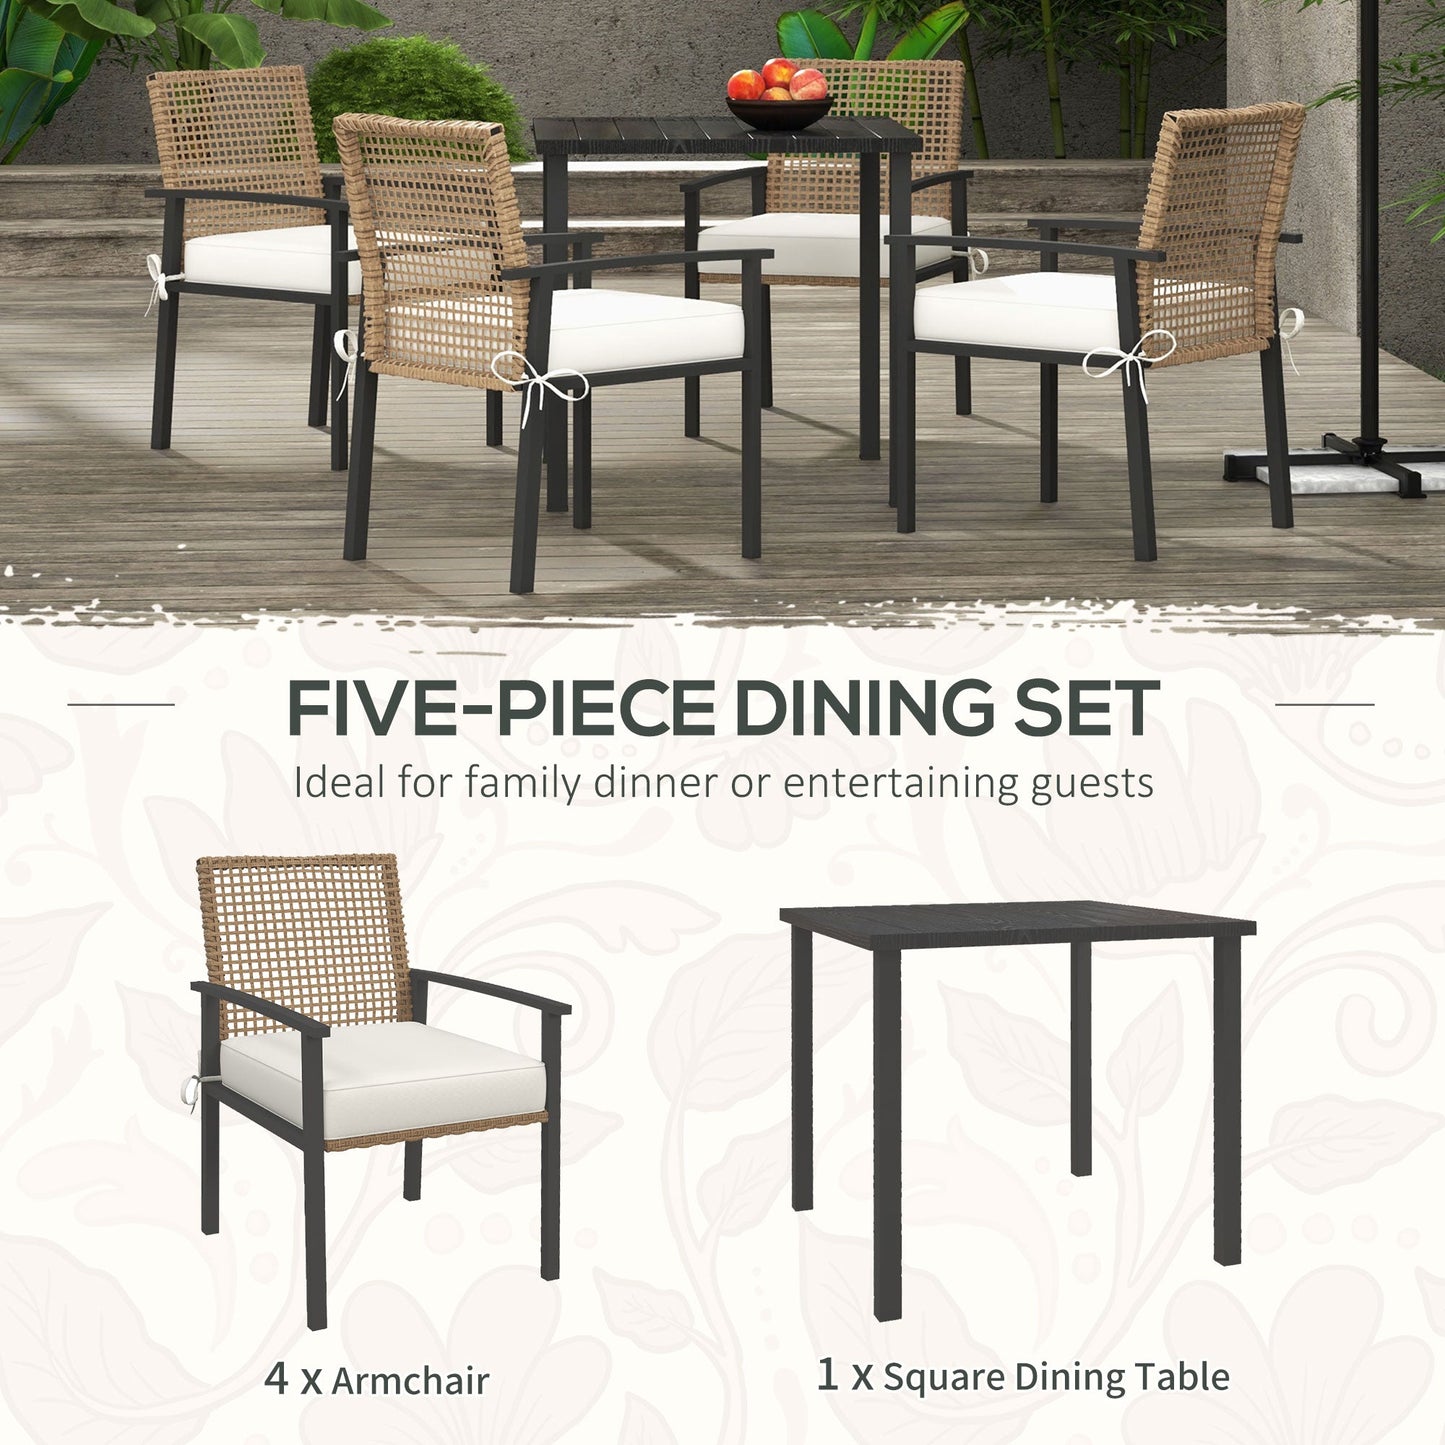 -Outsunny 5 Piece Patio Dining Set, Outdoor Table and Chairs with Cushions, Wicker Furniture Dining Set with Umbrella Hole, Beige - Outdoor Style Company